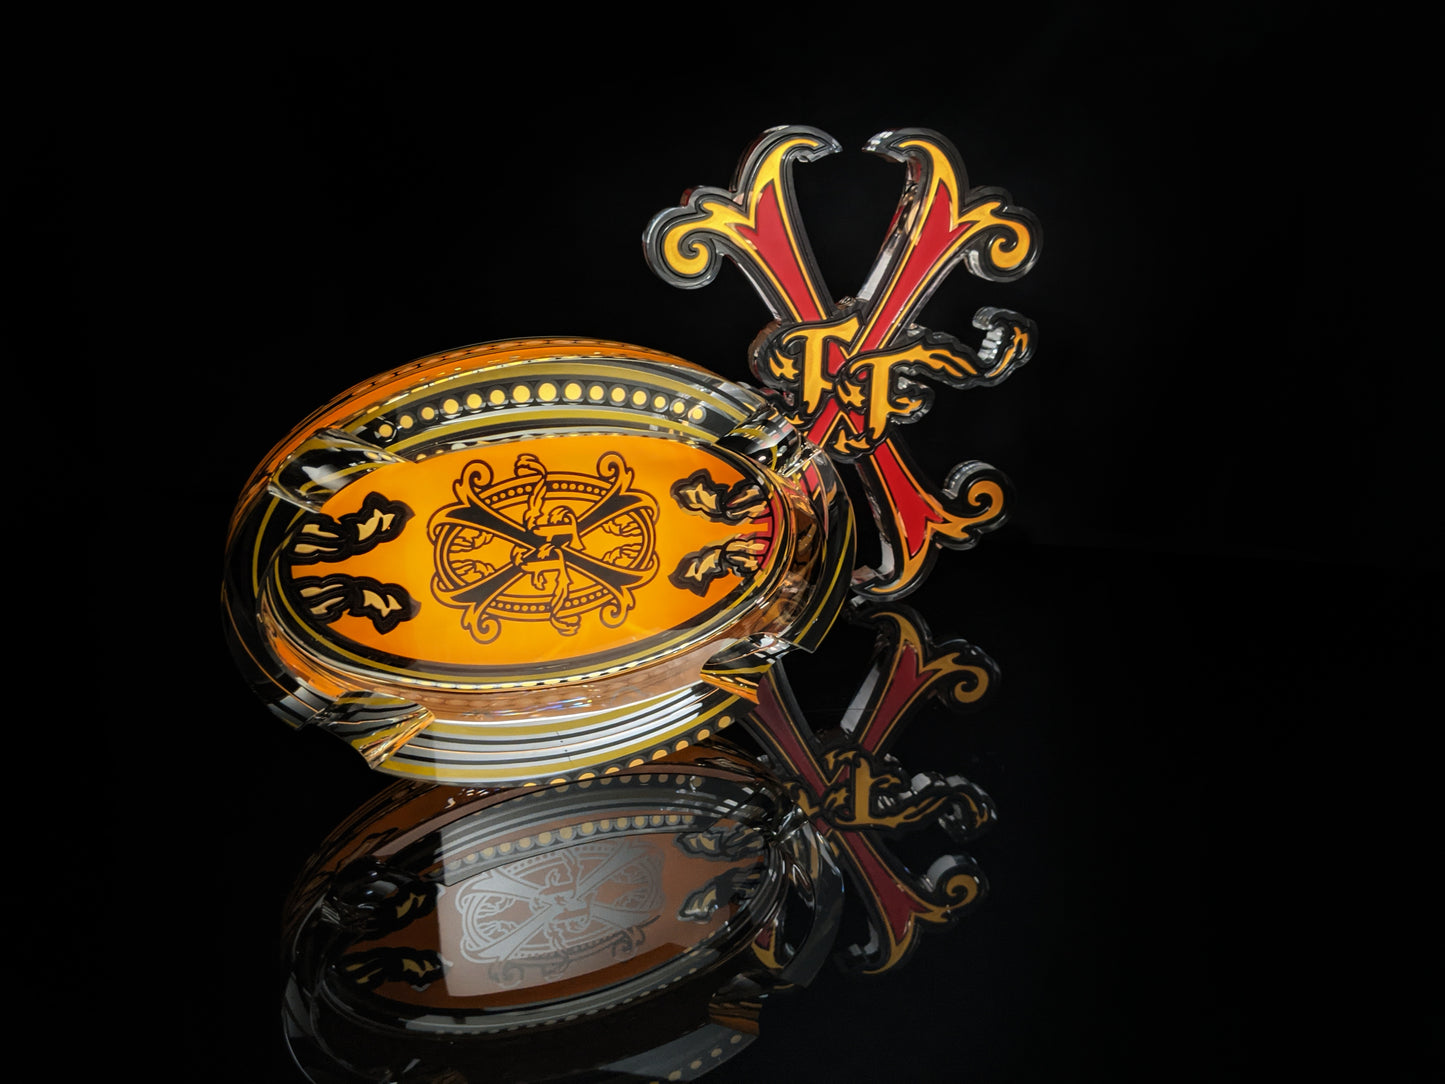 Fuente OpusX Limited Edition ashtray